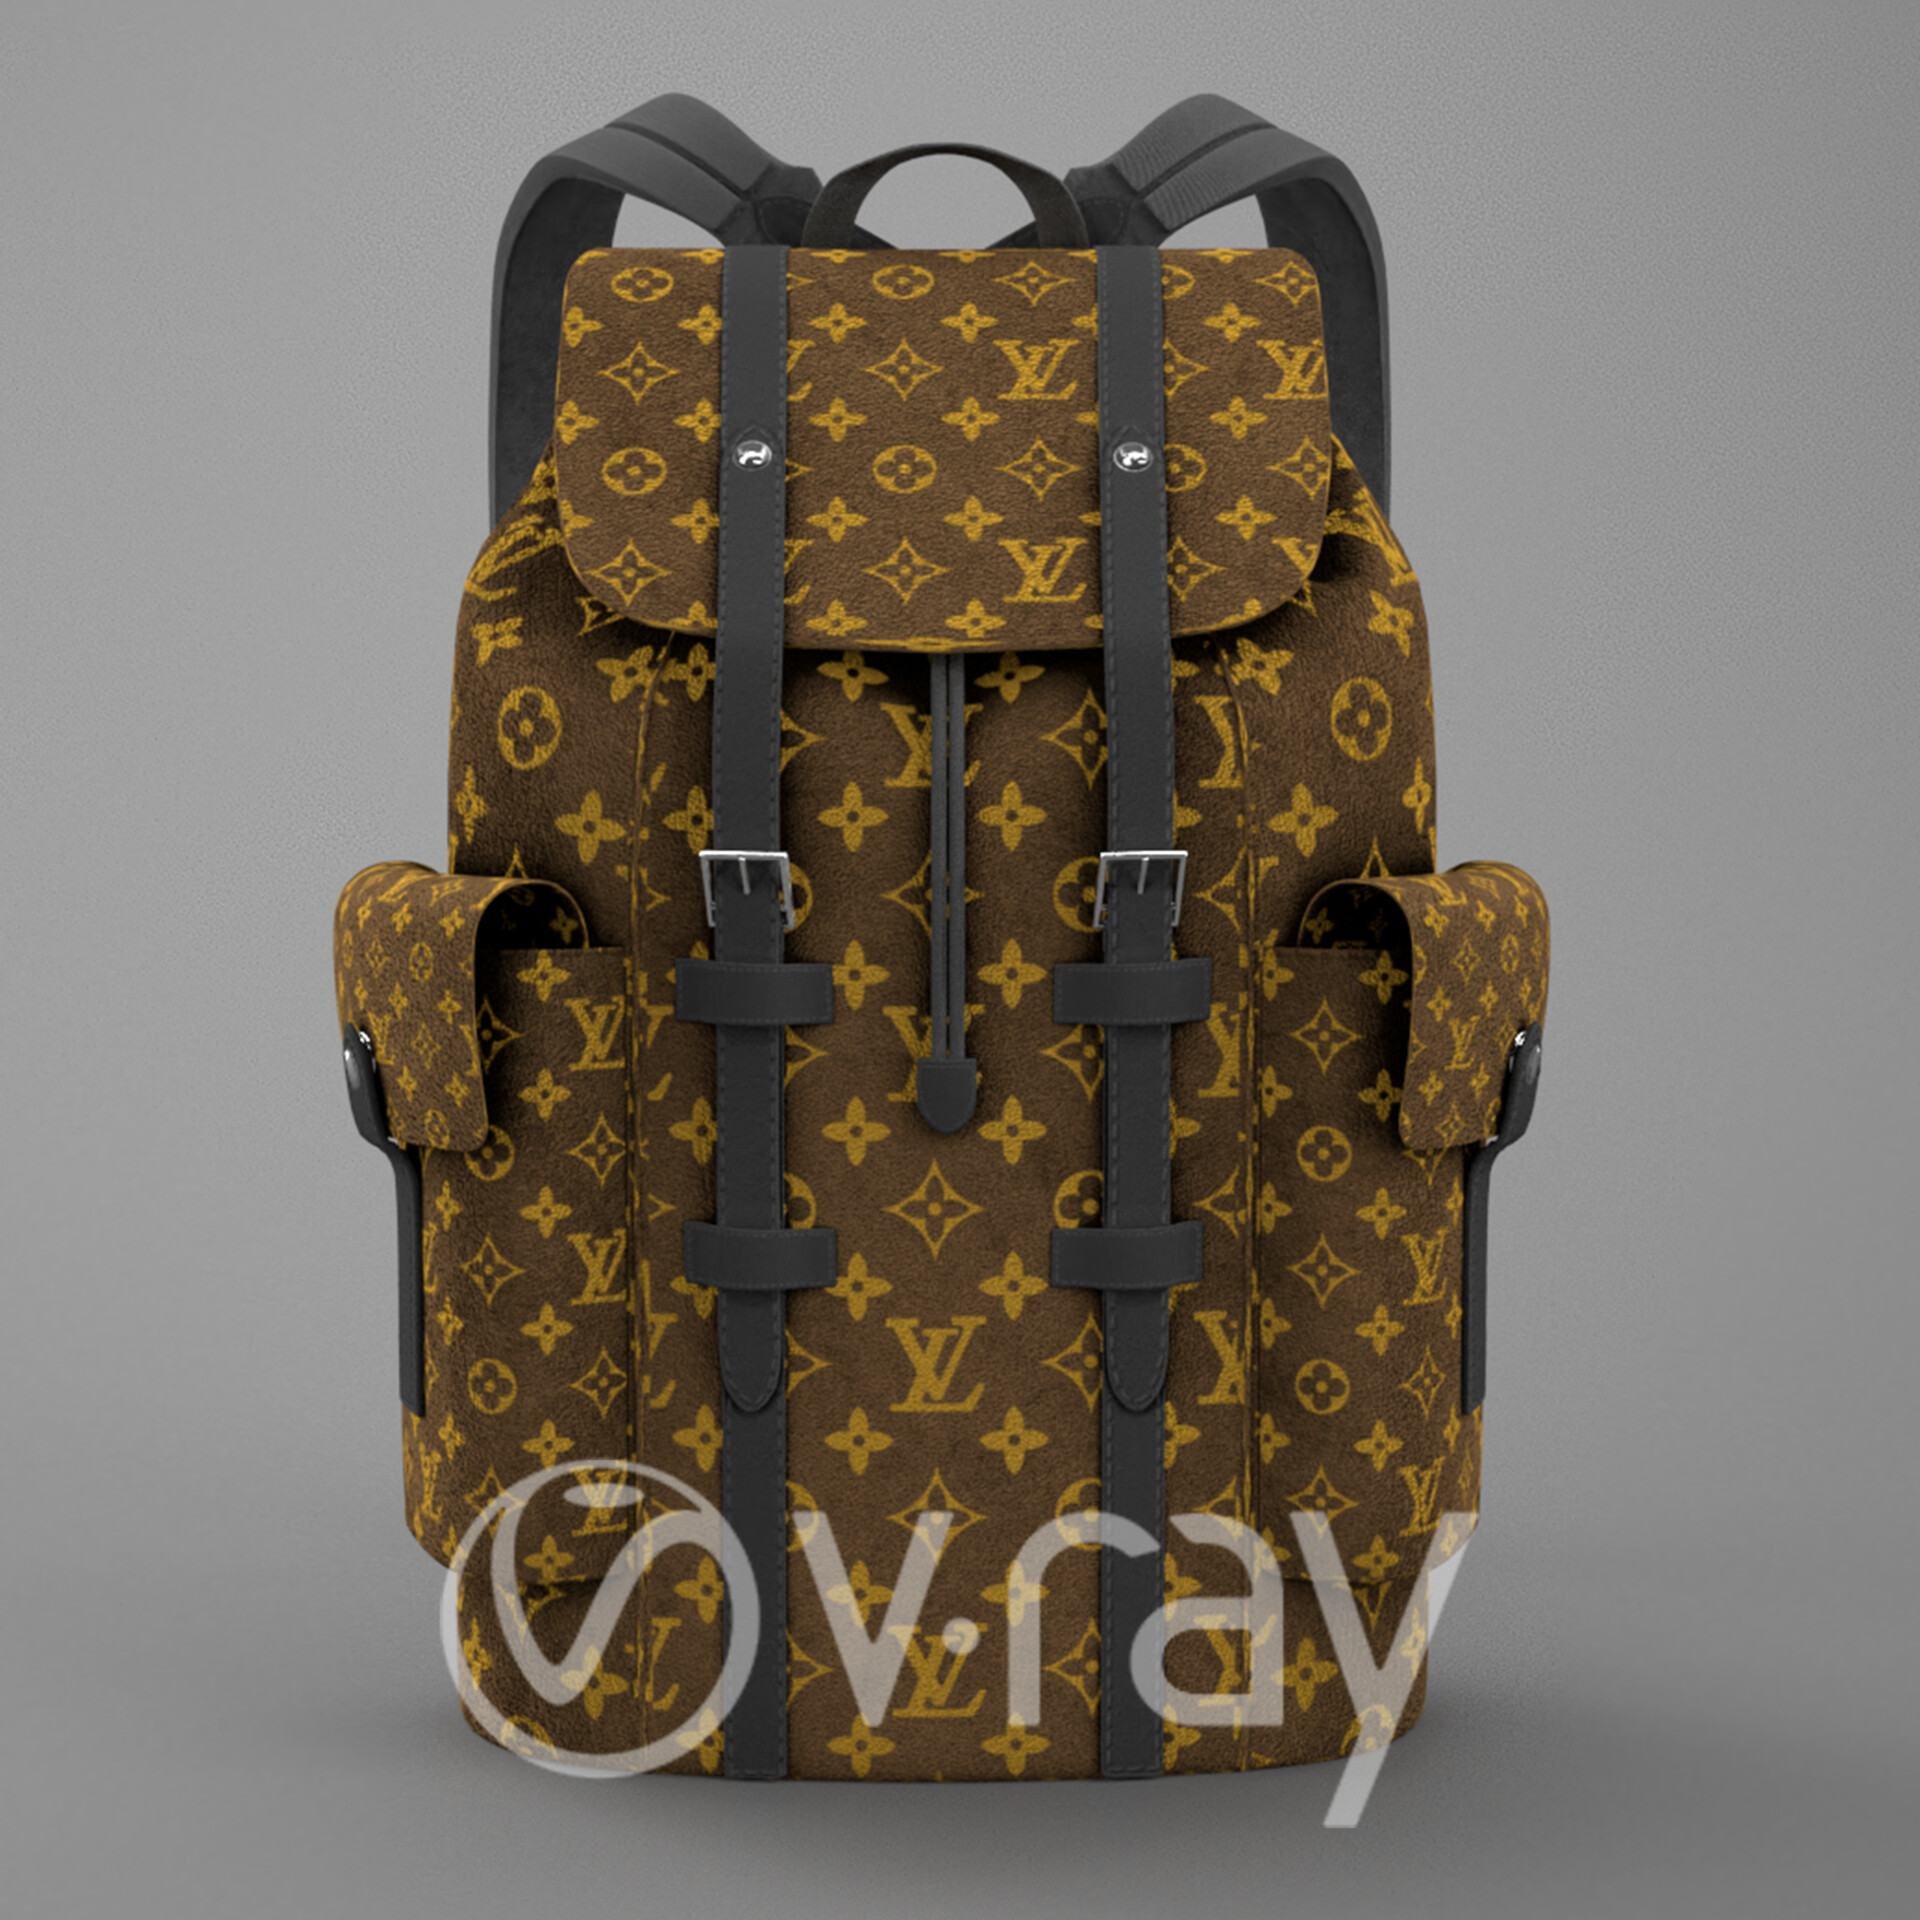 ArtStation - LOUIS VUITTON BACKPACK low-poly